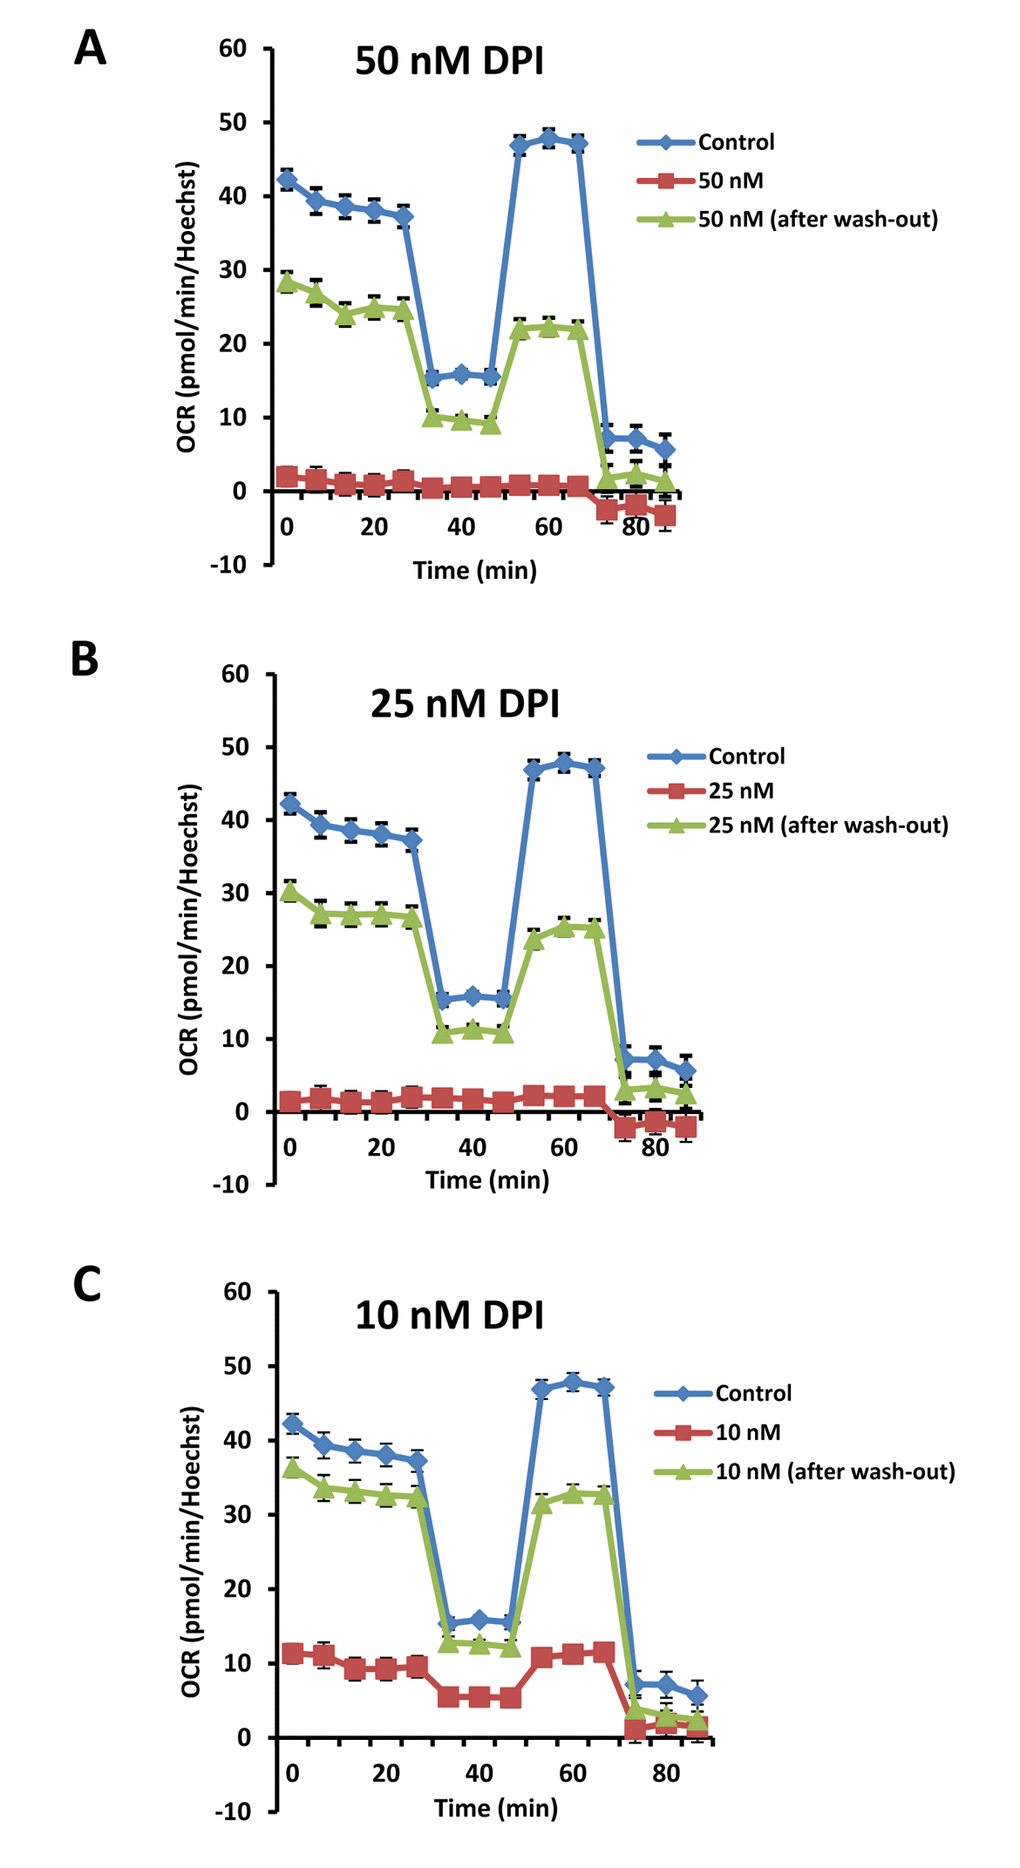 The inhibitory effects of DPI on mitochondrial respiration are reversible. To assess the reversibility of DPI’s effects after drug removal, MCF7 cells were first subjected to DPI treatment for 24 hours. Then, the DPI was removed by washing with normal media and the cells were cultured for an additional 24 hours to allow them to recover. This cycle of DPI-treatment, “wash-out” and recovery was carried out over a concentration range of 10 to 50 nM DPI. Note that with 10 nM DPI, there was a near complete recovery of basal respiration, after only 24 hours. Higher concentrations (25 and 50 nM) still showed significant recovery, but the recovery was not complete at this time point.